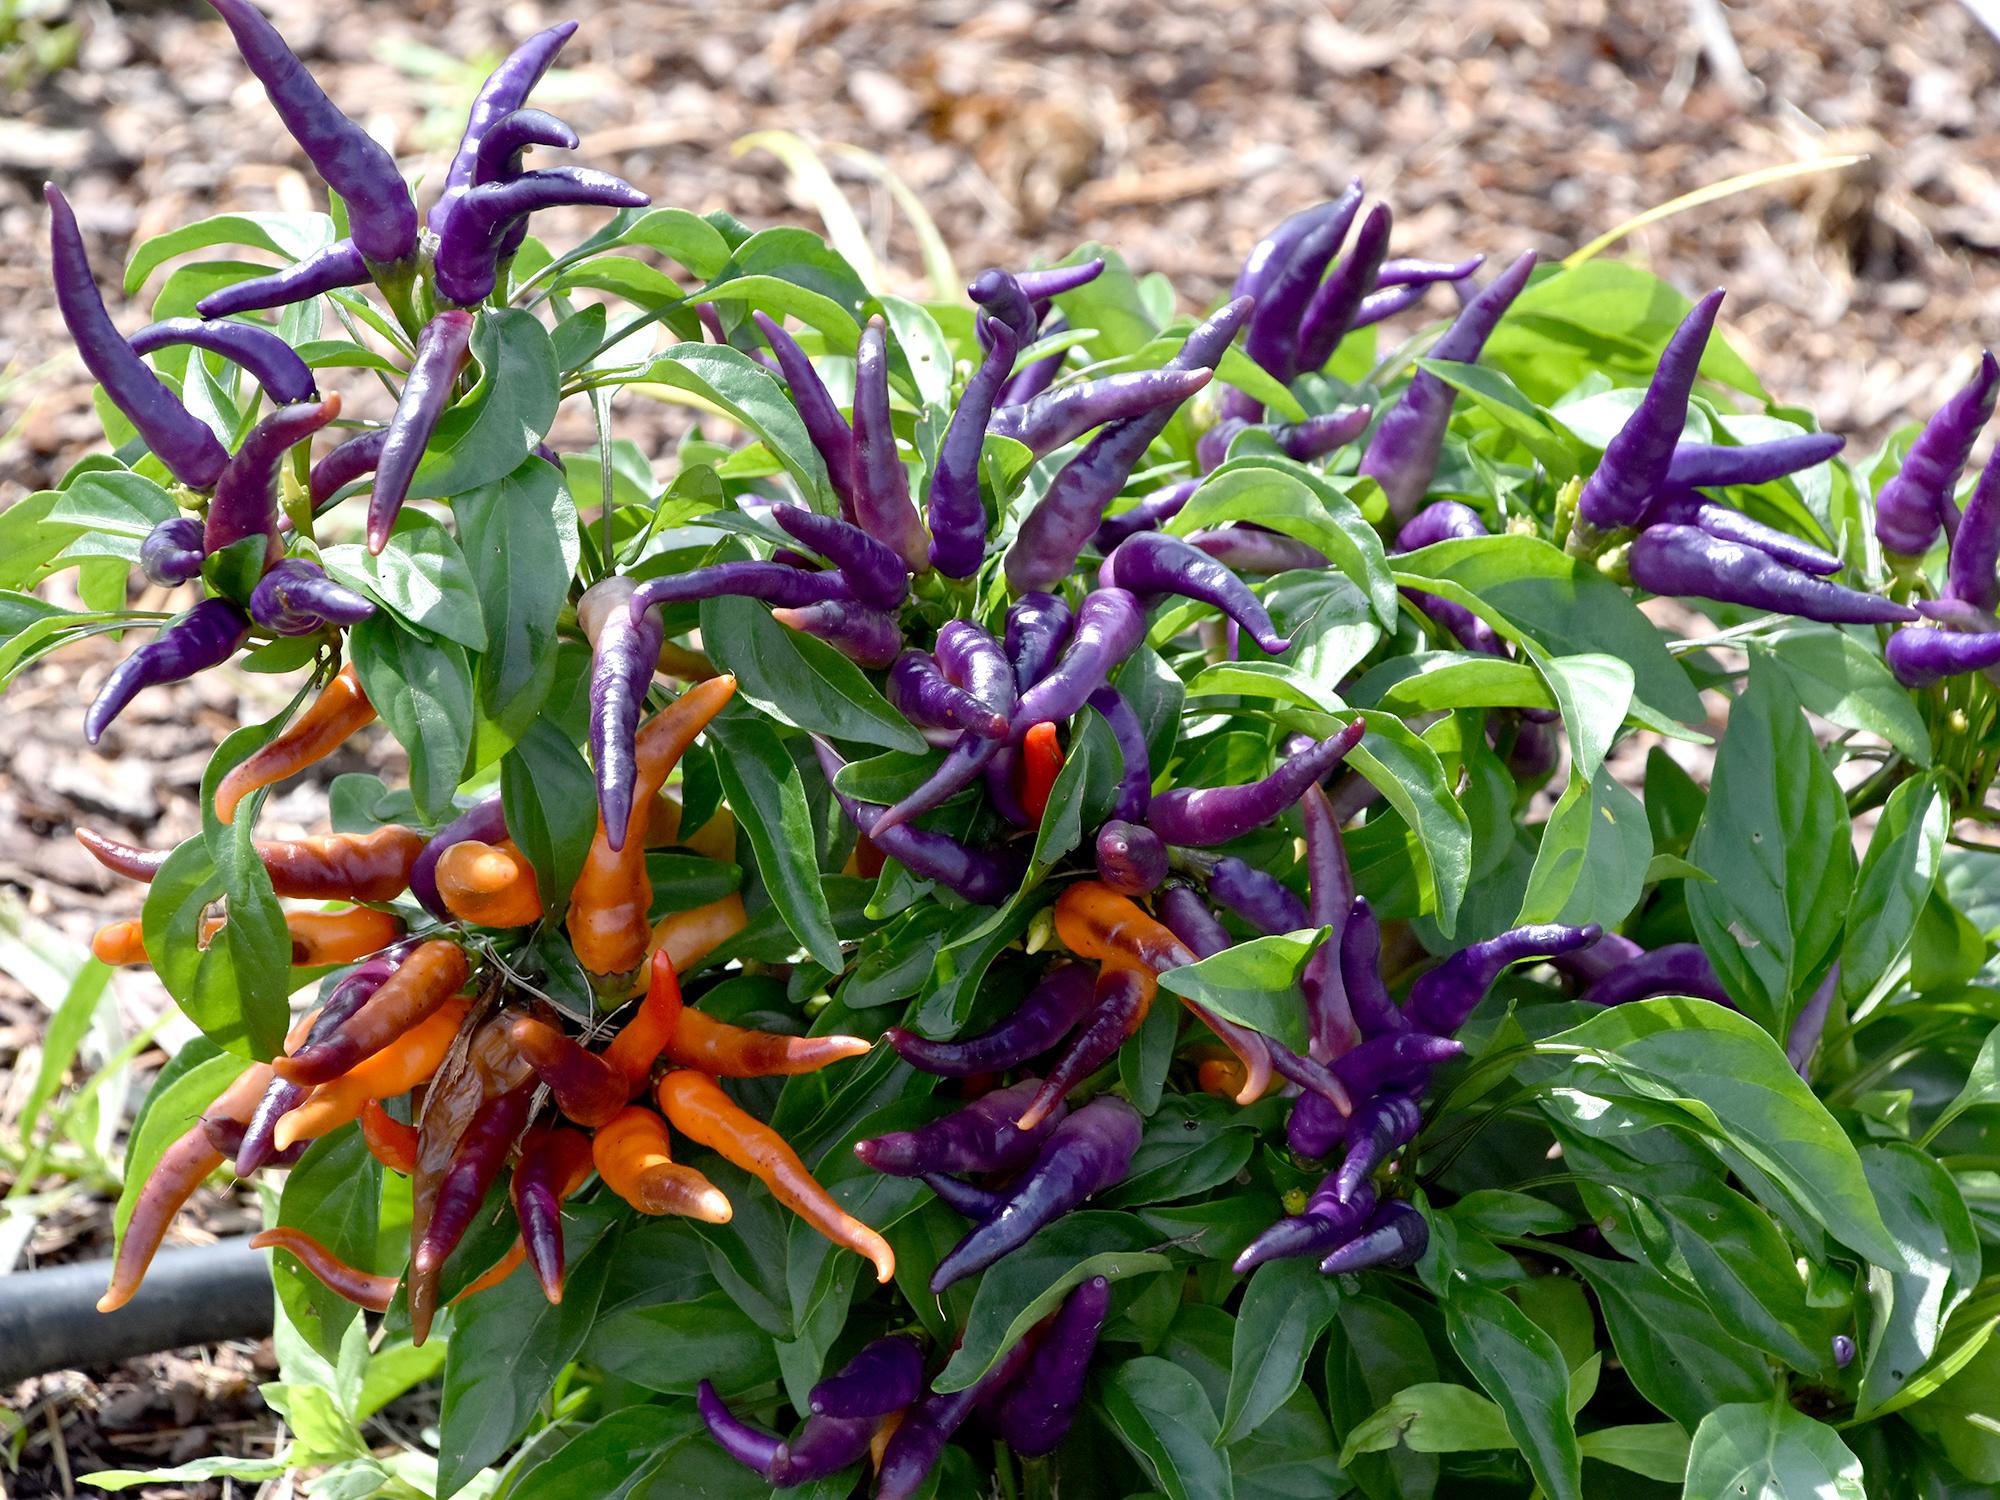 Ornamental peppers are available in an ever-increasing array of colors and styles, such as these NuMex April’s Fools peppers. (Photo by MSU Extension/Gary Bachman)